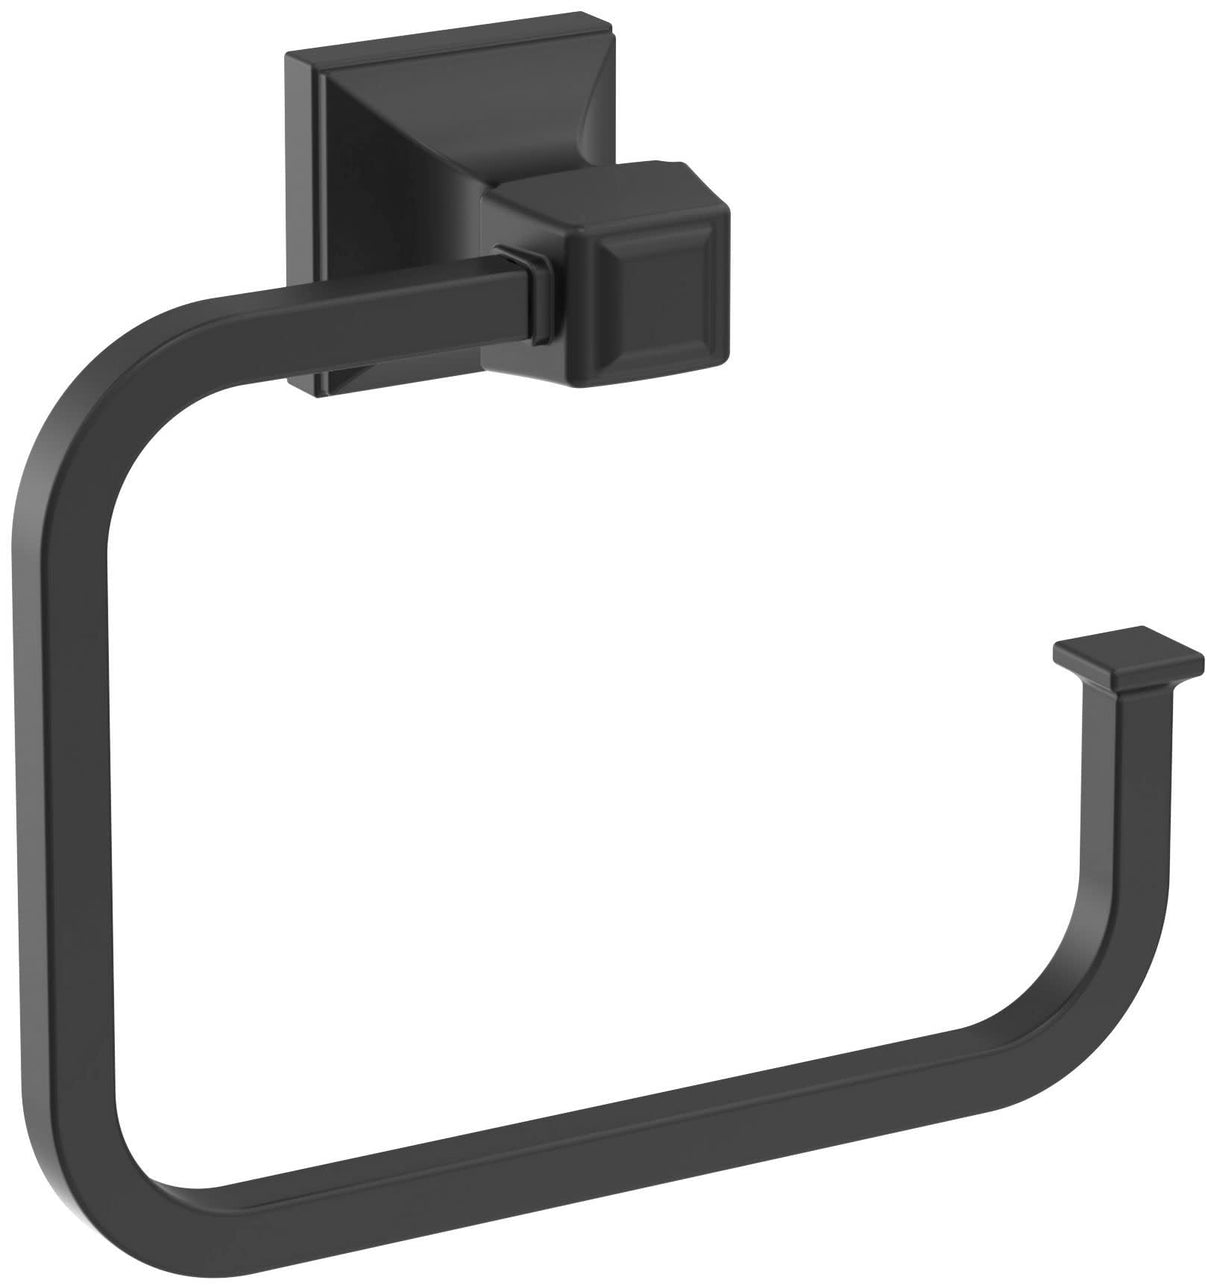 Amerock BH36022MB Matte Black Towel Ring 5-3/4 in (146 mm) Length Towel Holder Mulholland Hand Towel Holder for Bathroom Wall Small Kitchen Towel Holder Bath Accessories